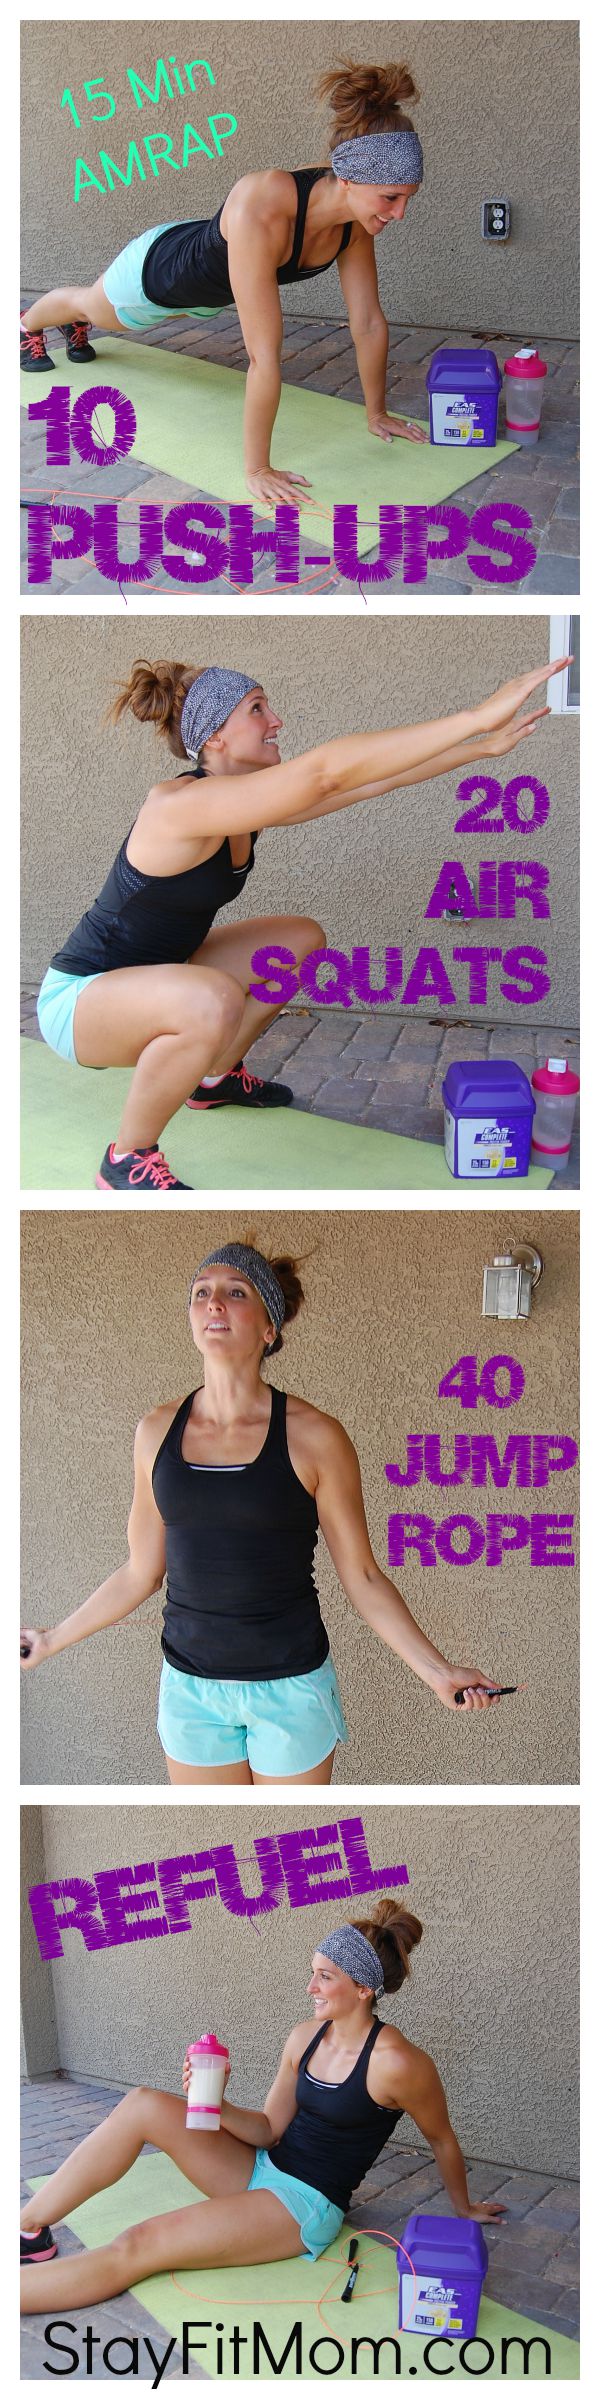 Love these at home workouts from Stayfitmom.com!